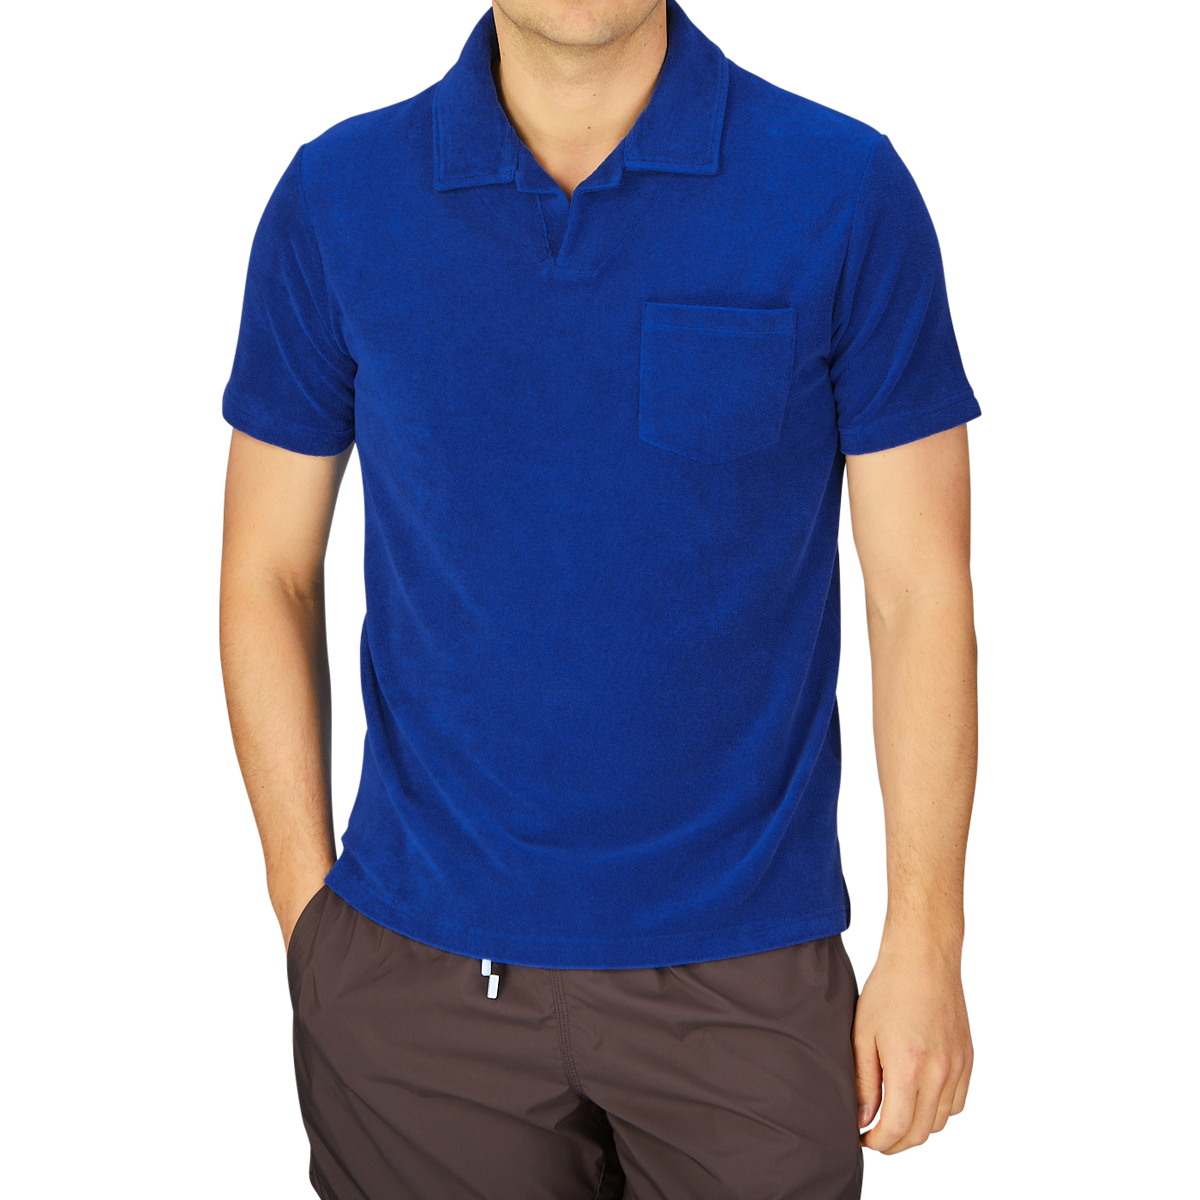 Man wearing a casual Altea Dark Blue Cotton Towelling Capri Collar Polo Shirt with a chest pocket.